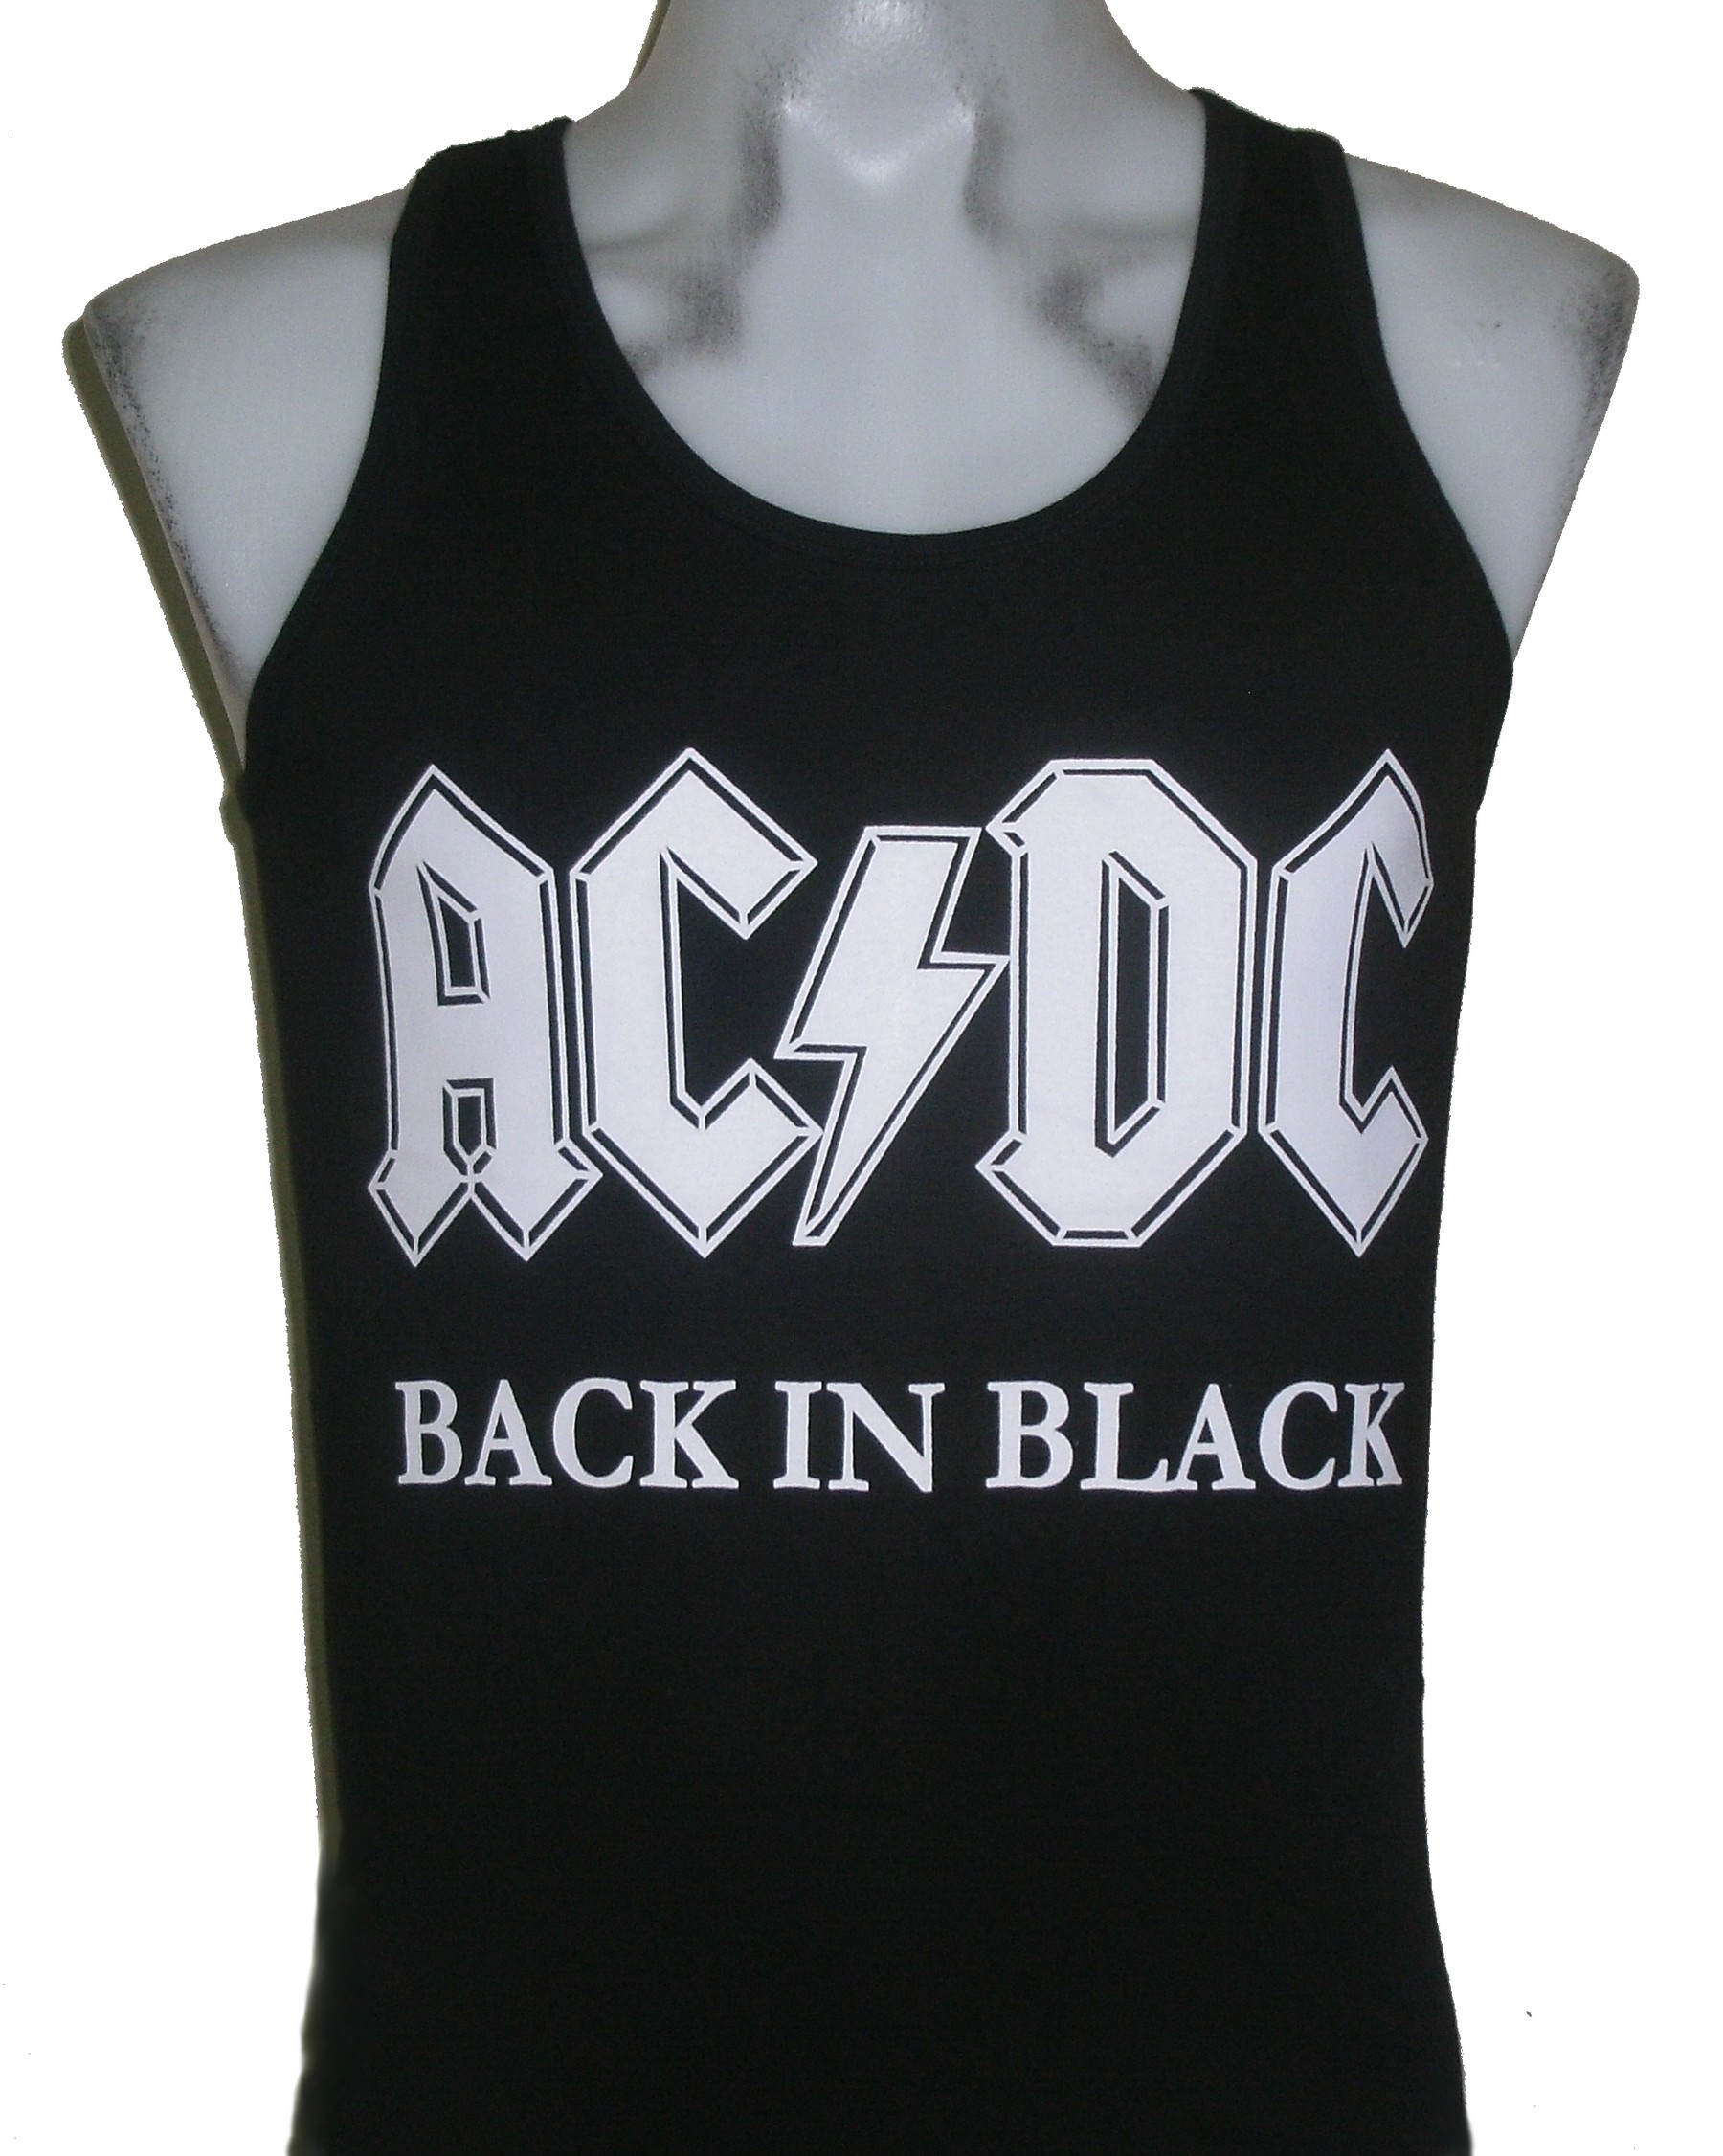 acdc tank top womens